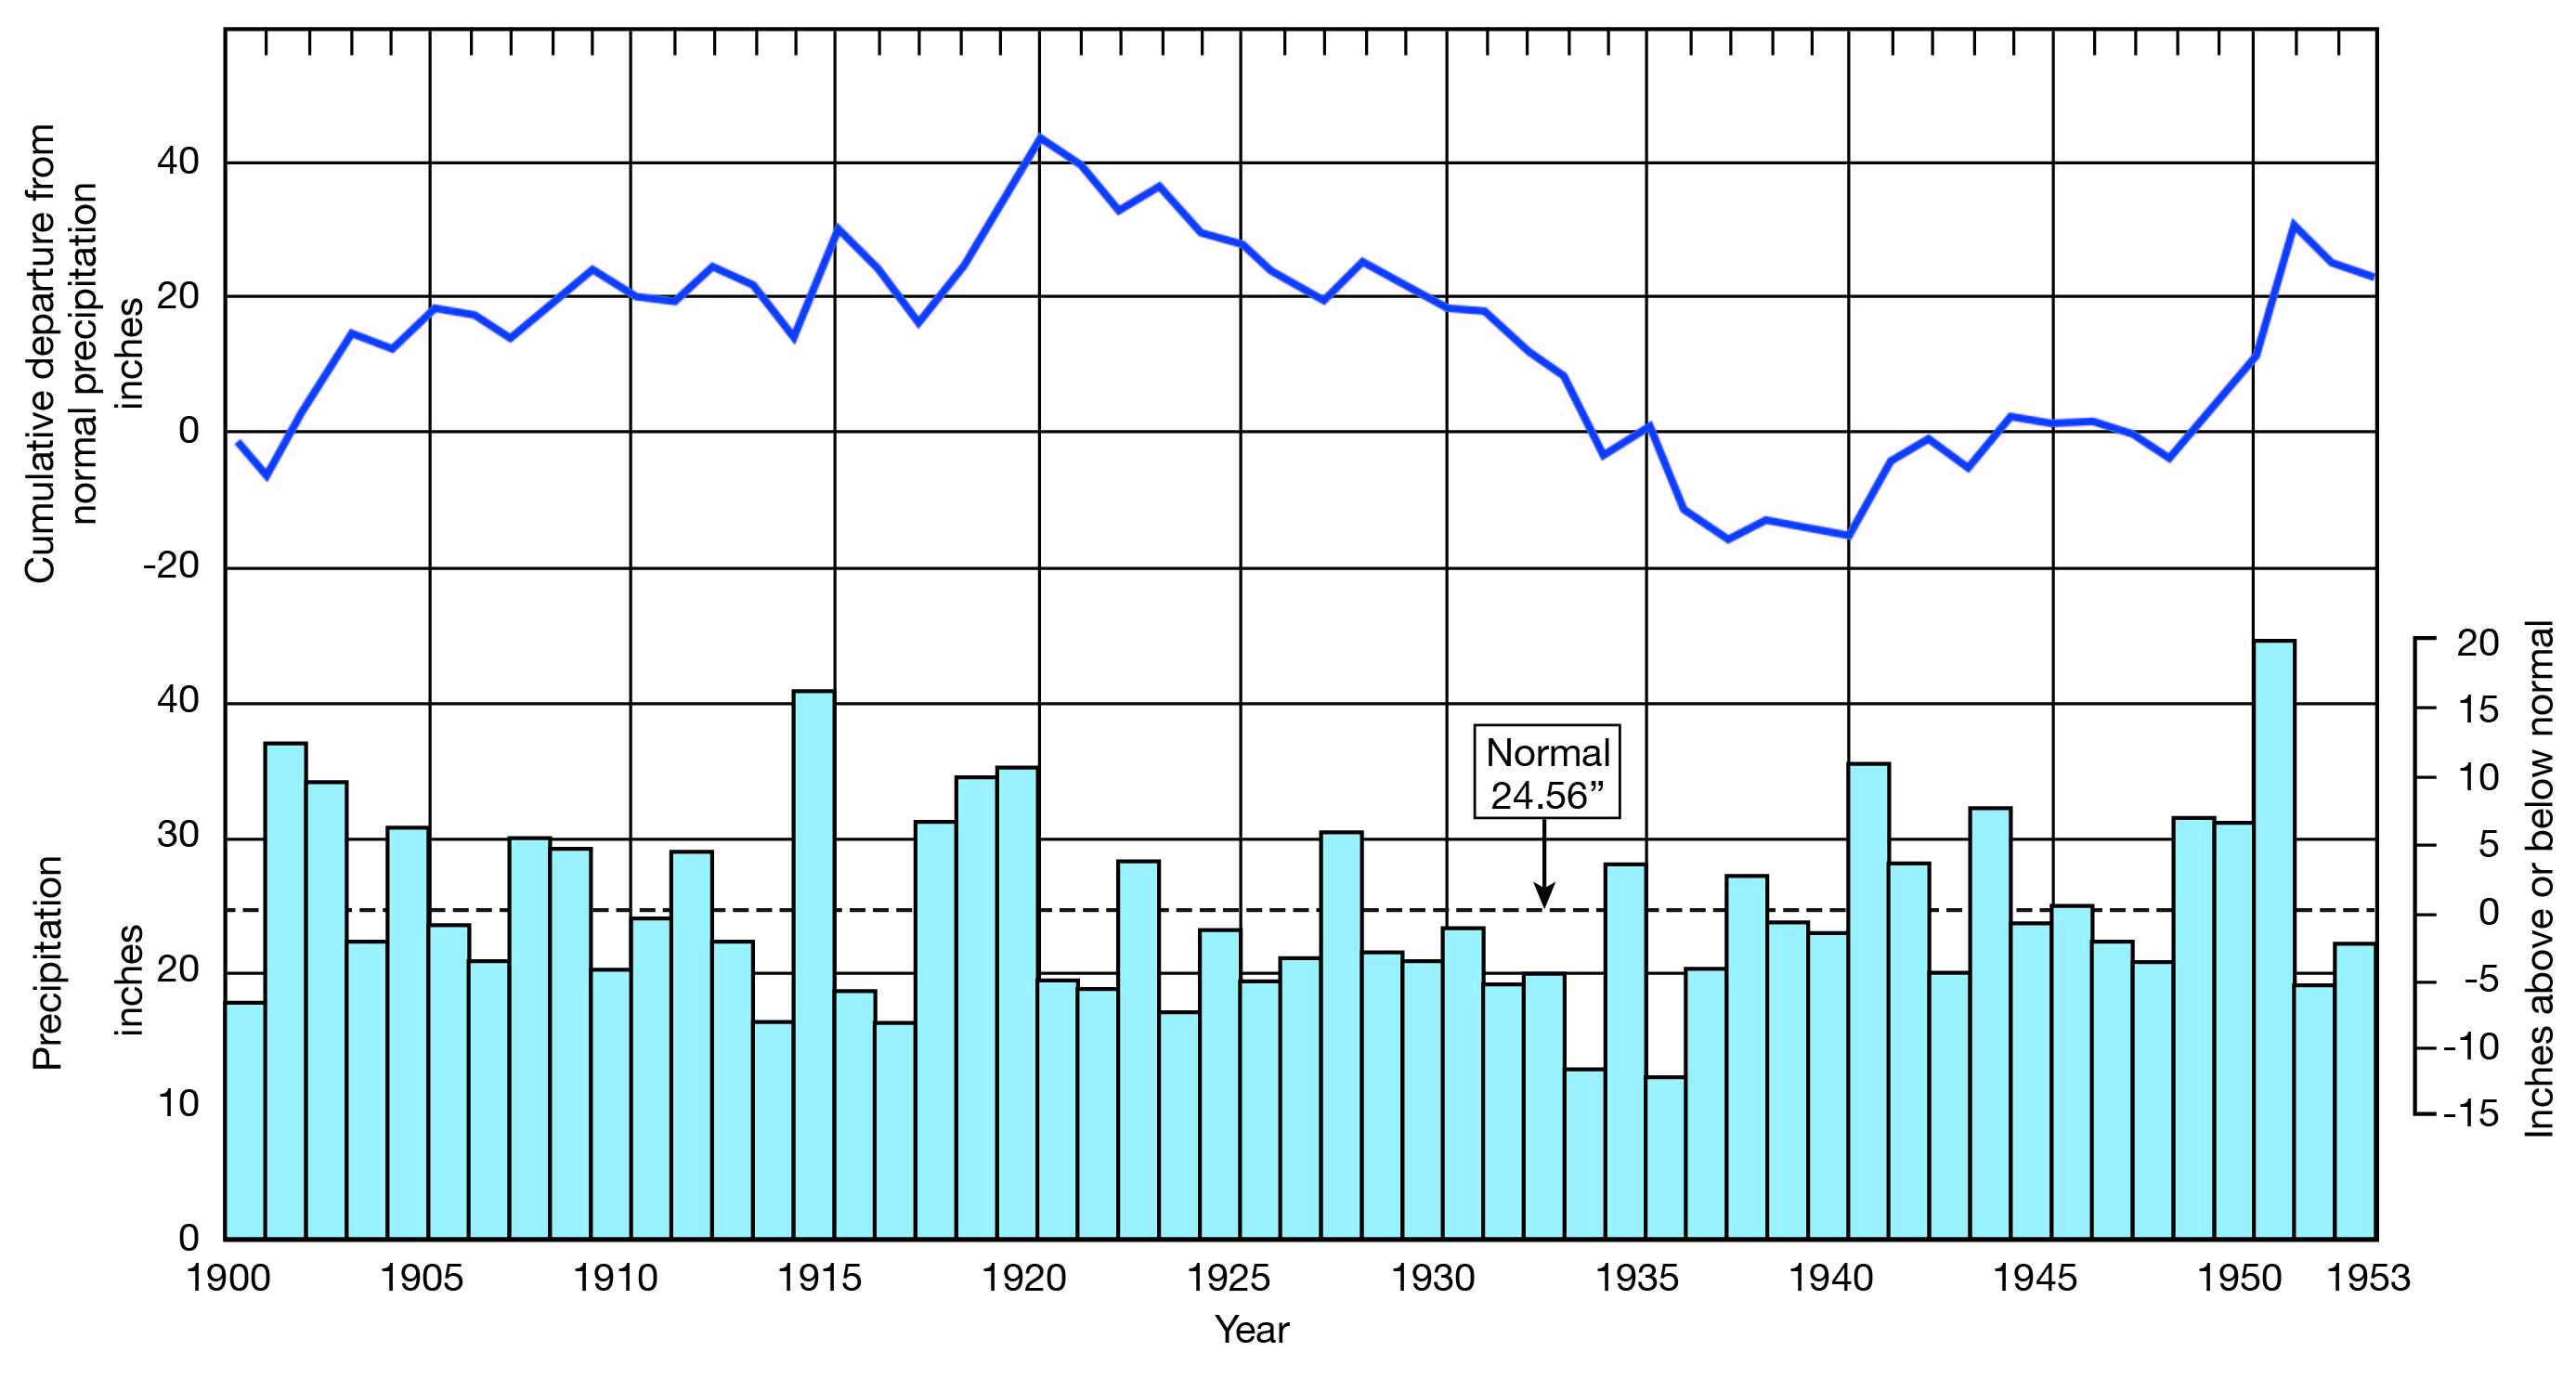 Early 1900s, late 1910s, 1940s and 1950 had high precipitation; low levels arround from 1920 to mid 1930s.